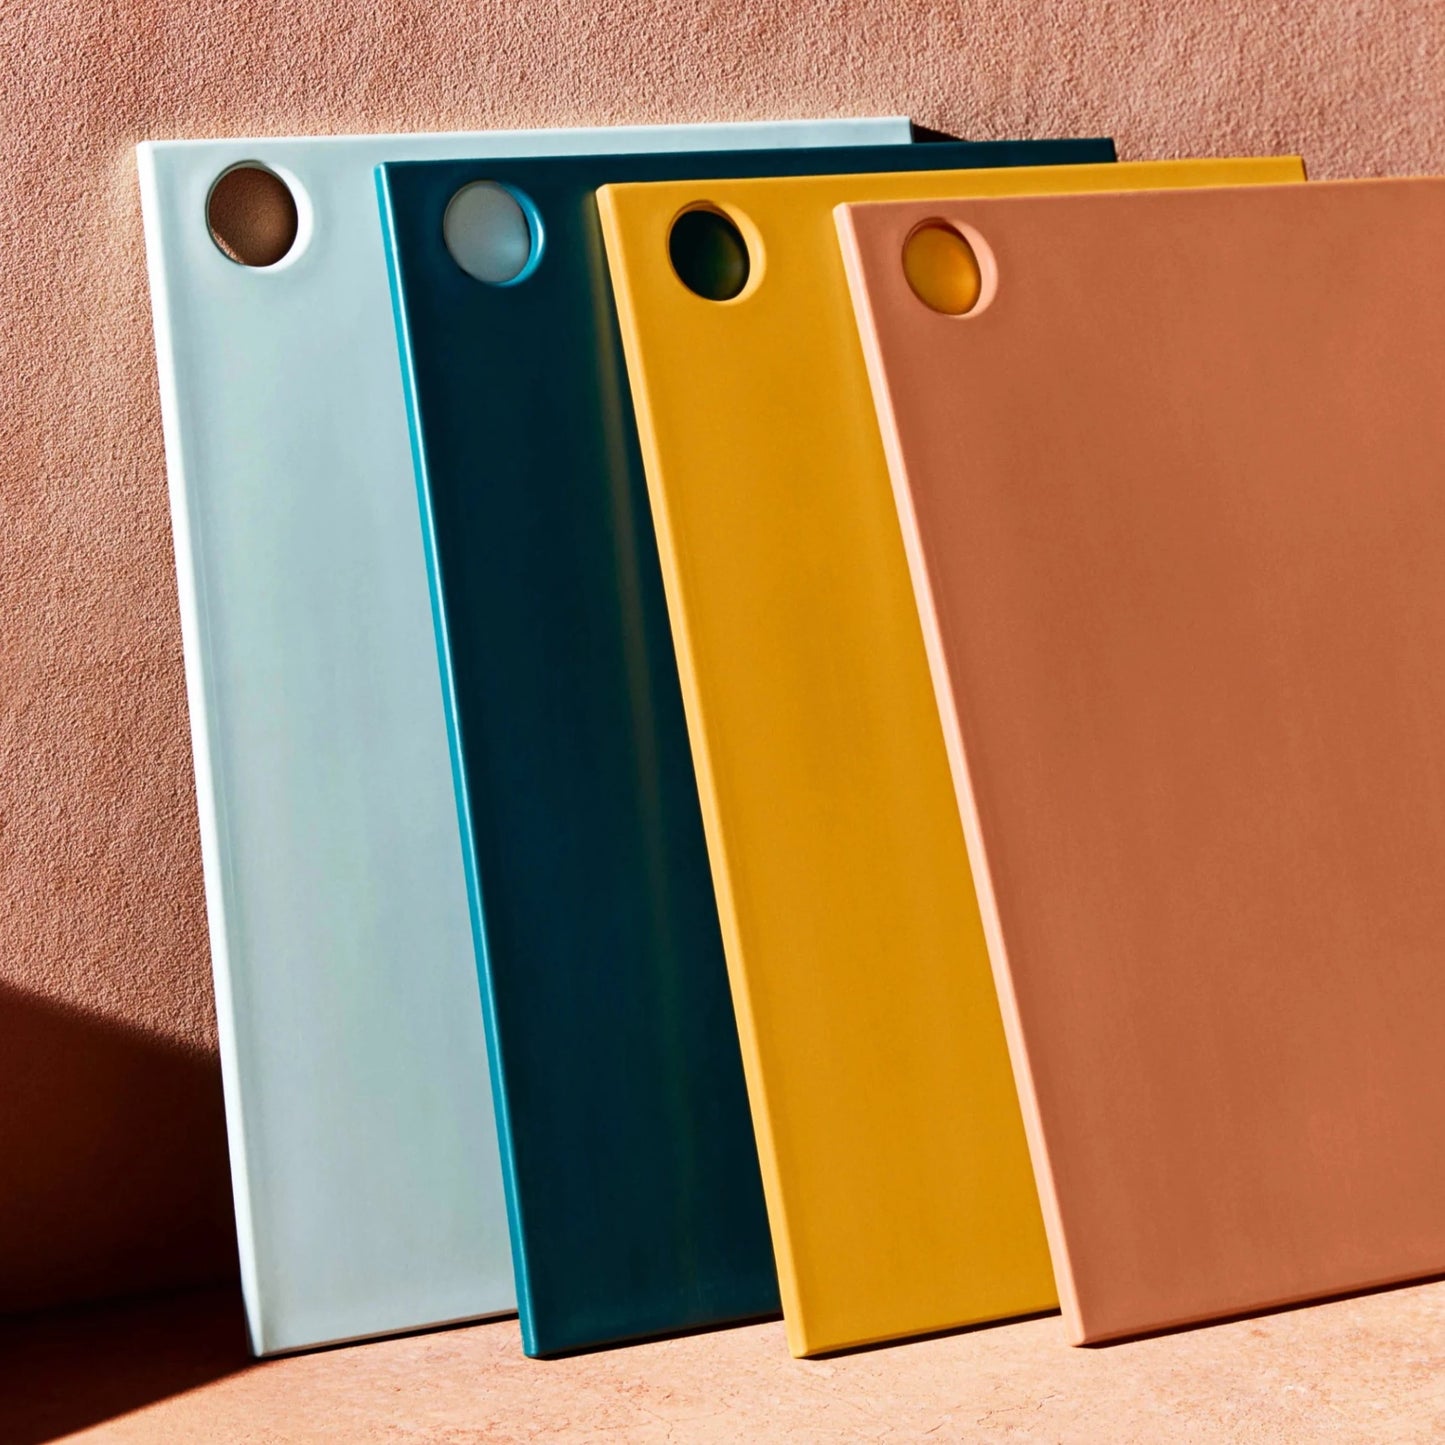 Everything to love, and nothing to waste. These colorful BPA-free cutting boards are made entirely of kitchen plastic scraps and renewable sugarcane. One small step for sustainability, one giant leap for kitchen goods. 